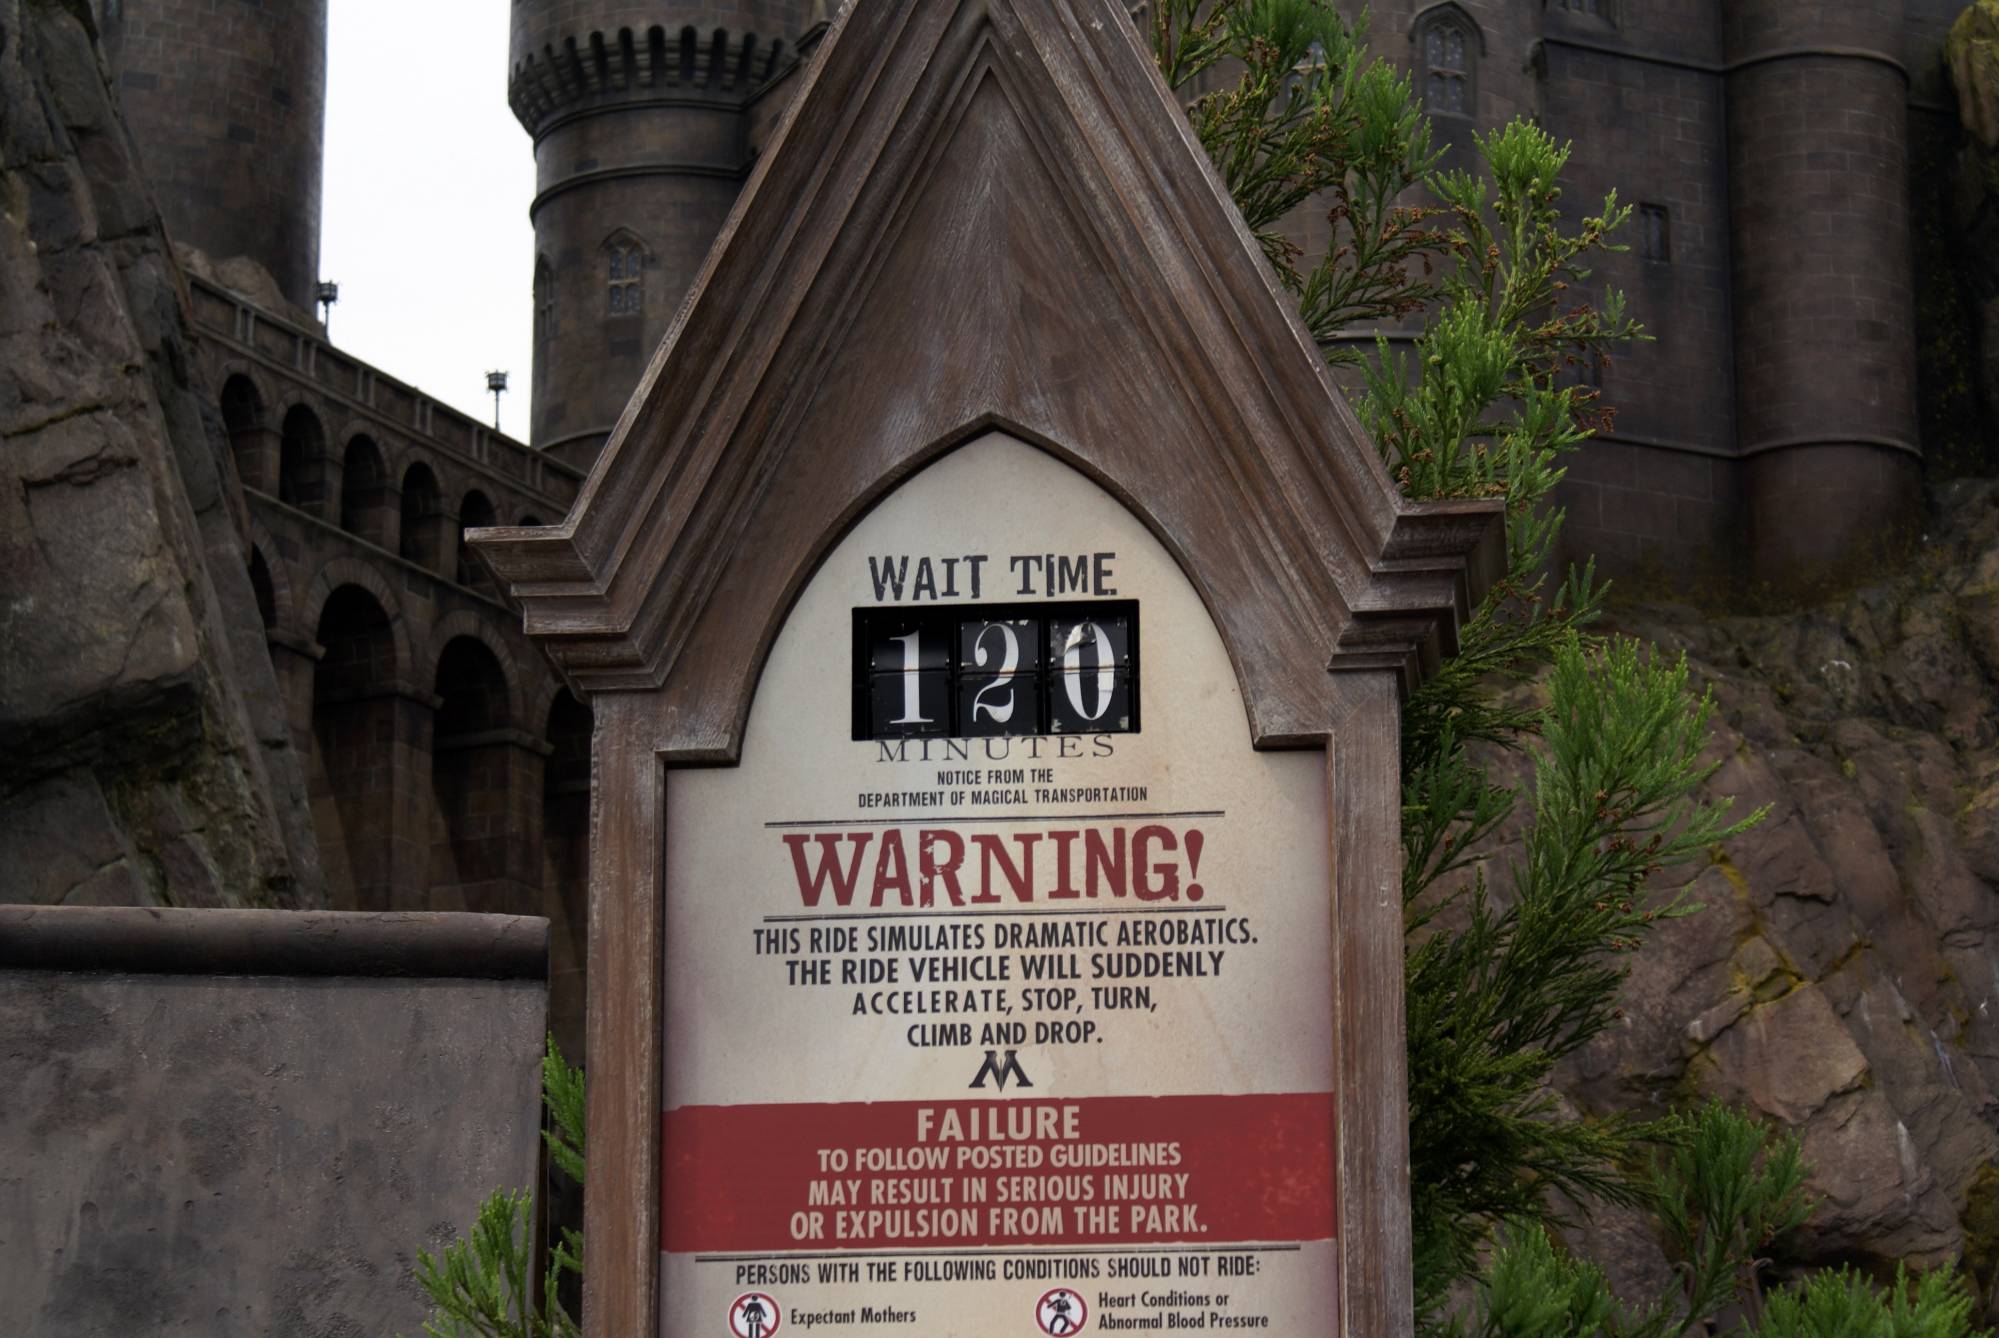 Ride Time for Forbidden Journey